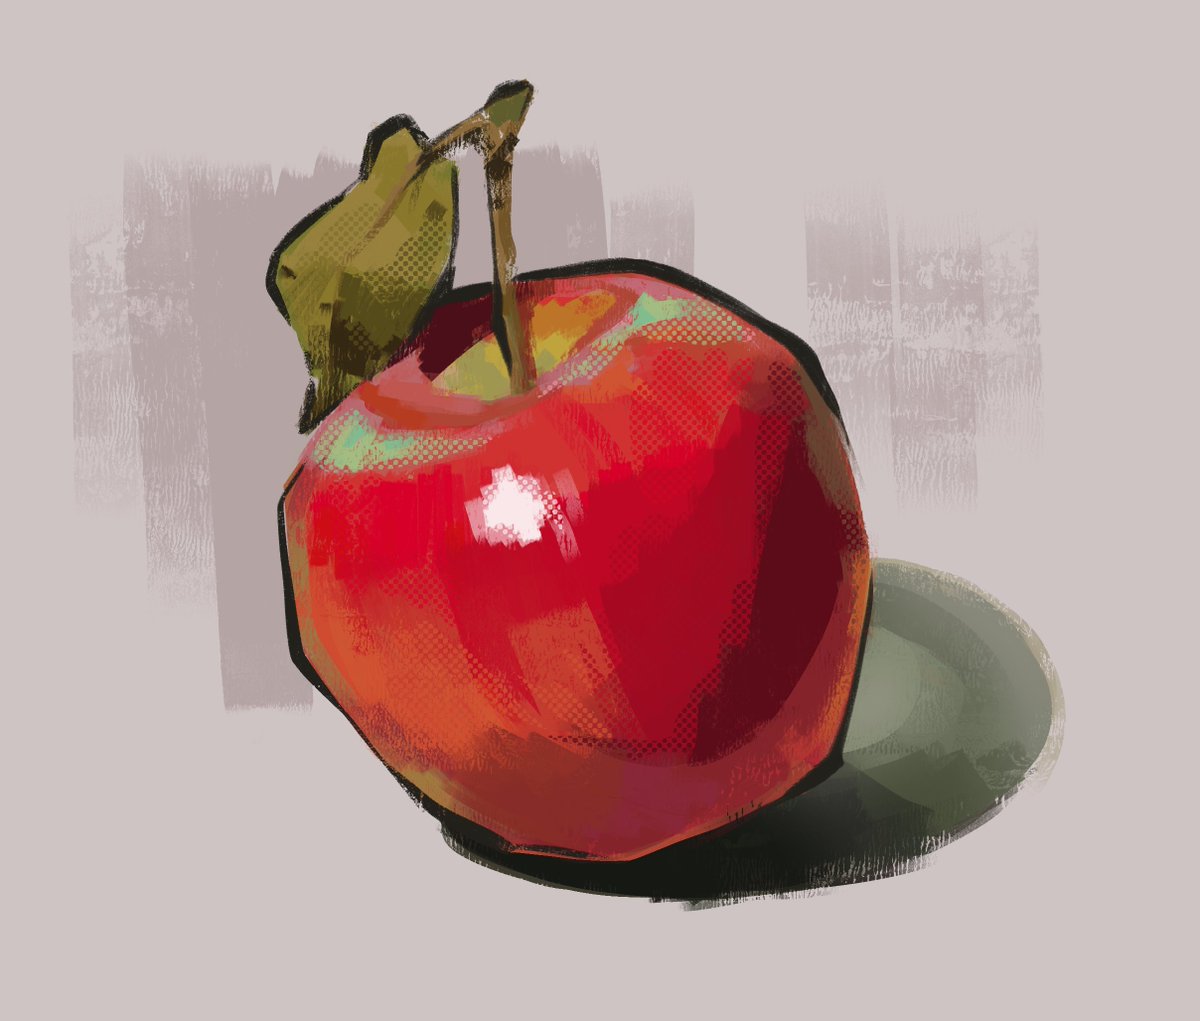 「unreasonably happy with this apple i pai」|pibbyboy ❎のイラスト